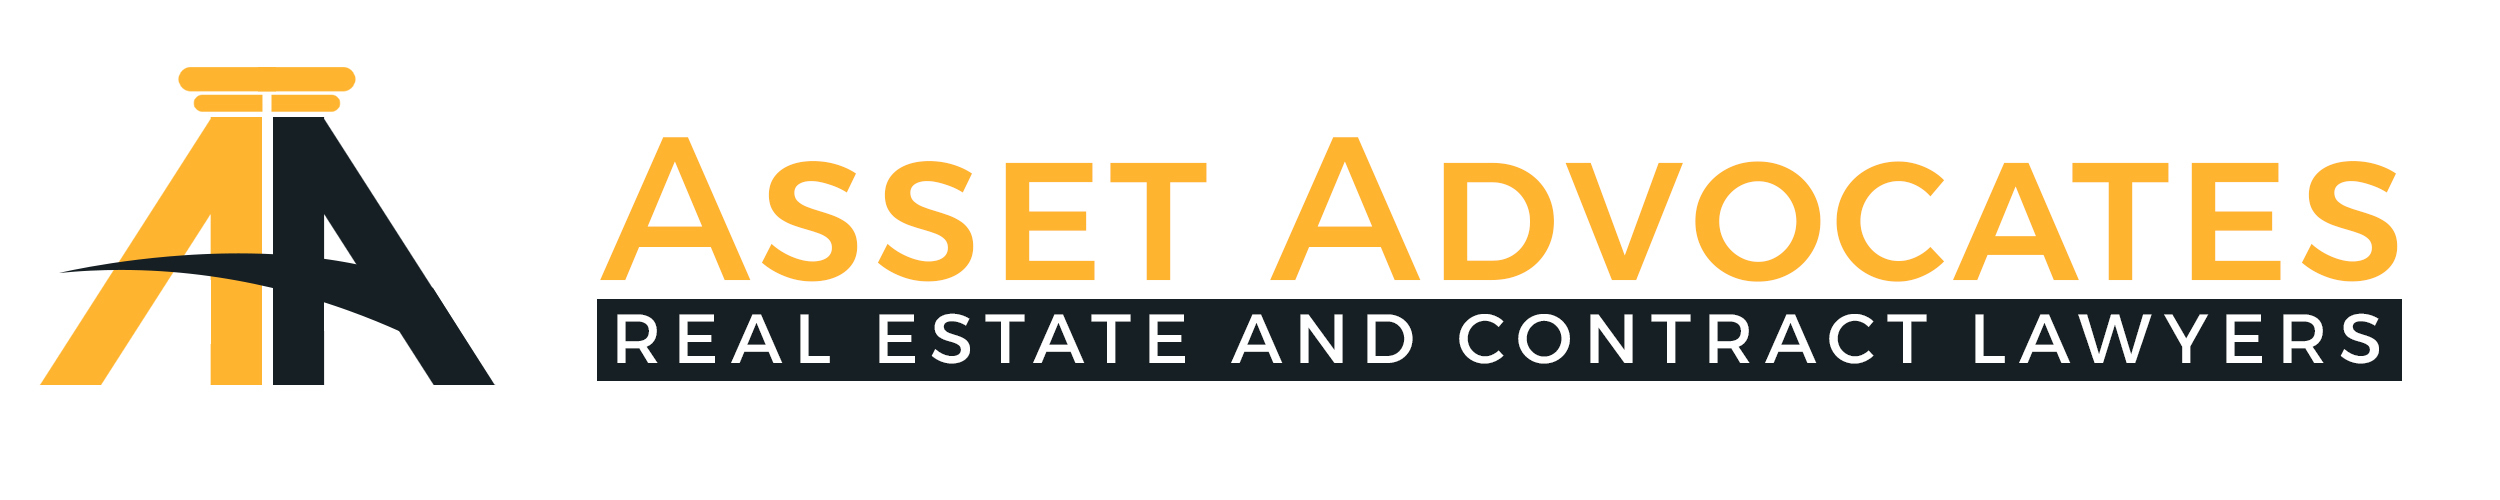 Asset-Advocates-Real-Estate-and-Contract-Lawyers-Logo.jpg